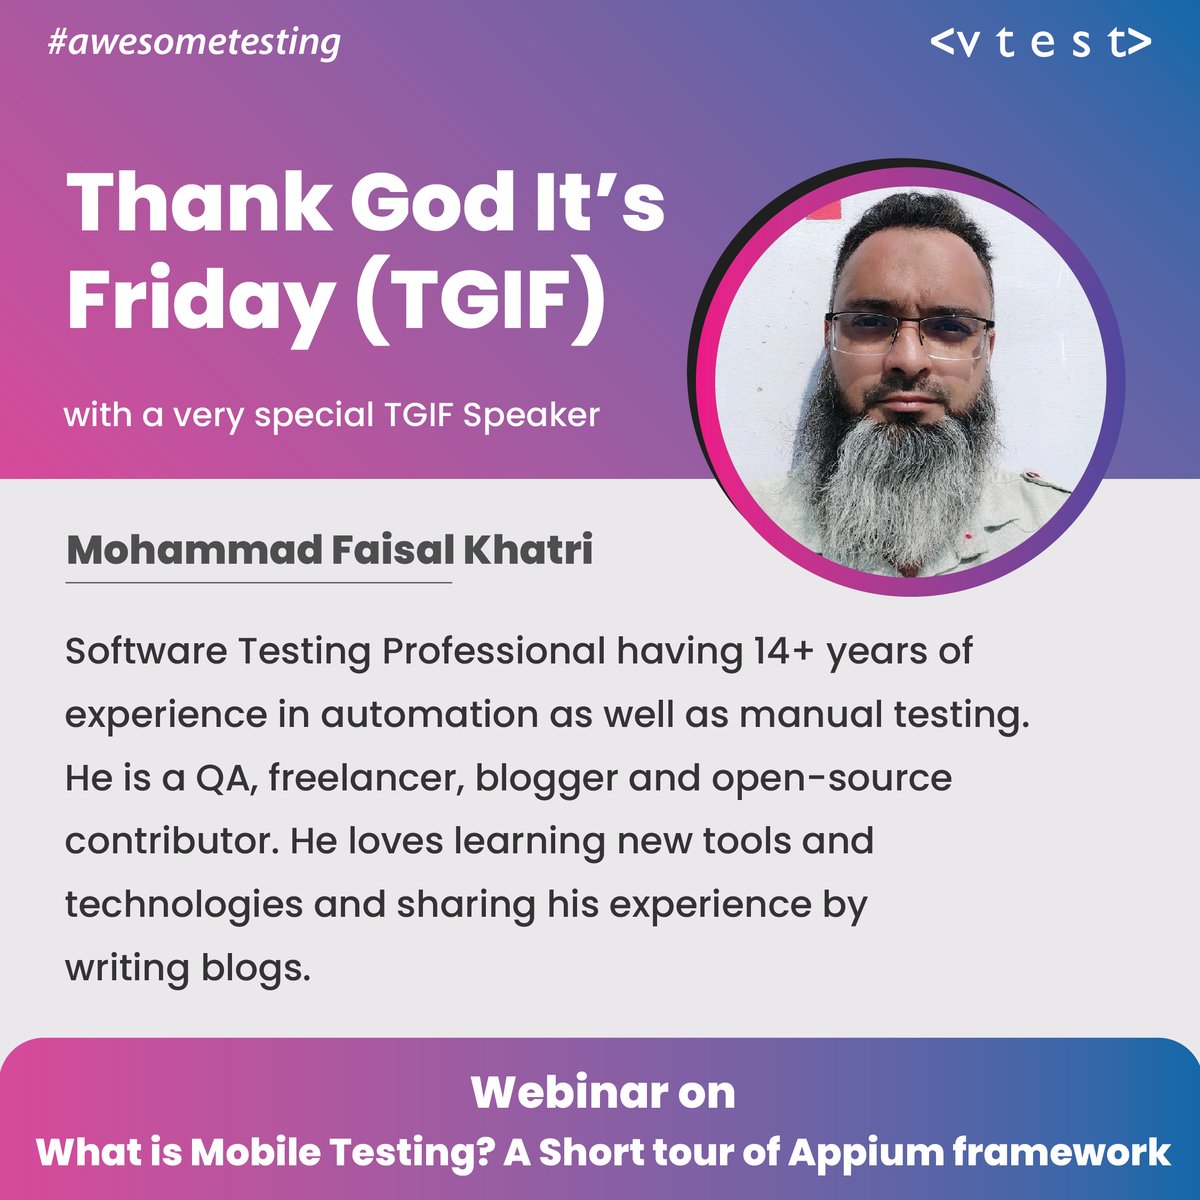 Our TGIF session last Friday was fantastic! 

@mfaisal_khatri, our guest speaker, shared his expertise on mobile testing and Appium framework. 

Thank you, Mr. Faisal, for inspiring us to strive for excellence. 

#mobiletesting #appiumframework #vtest #awesometesting